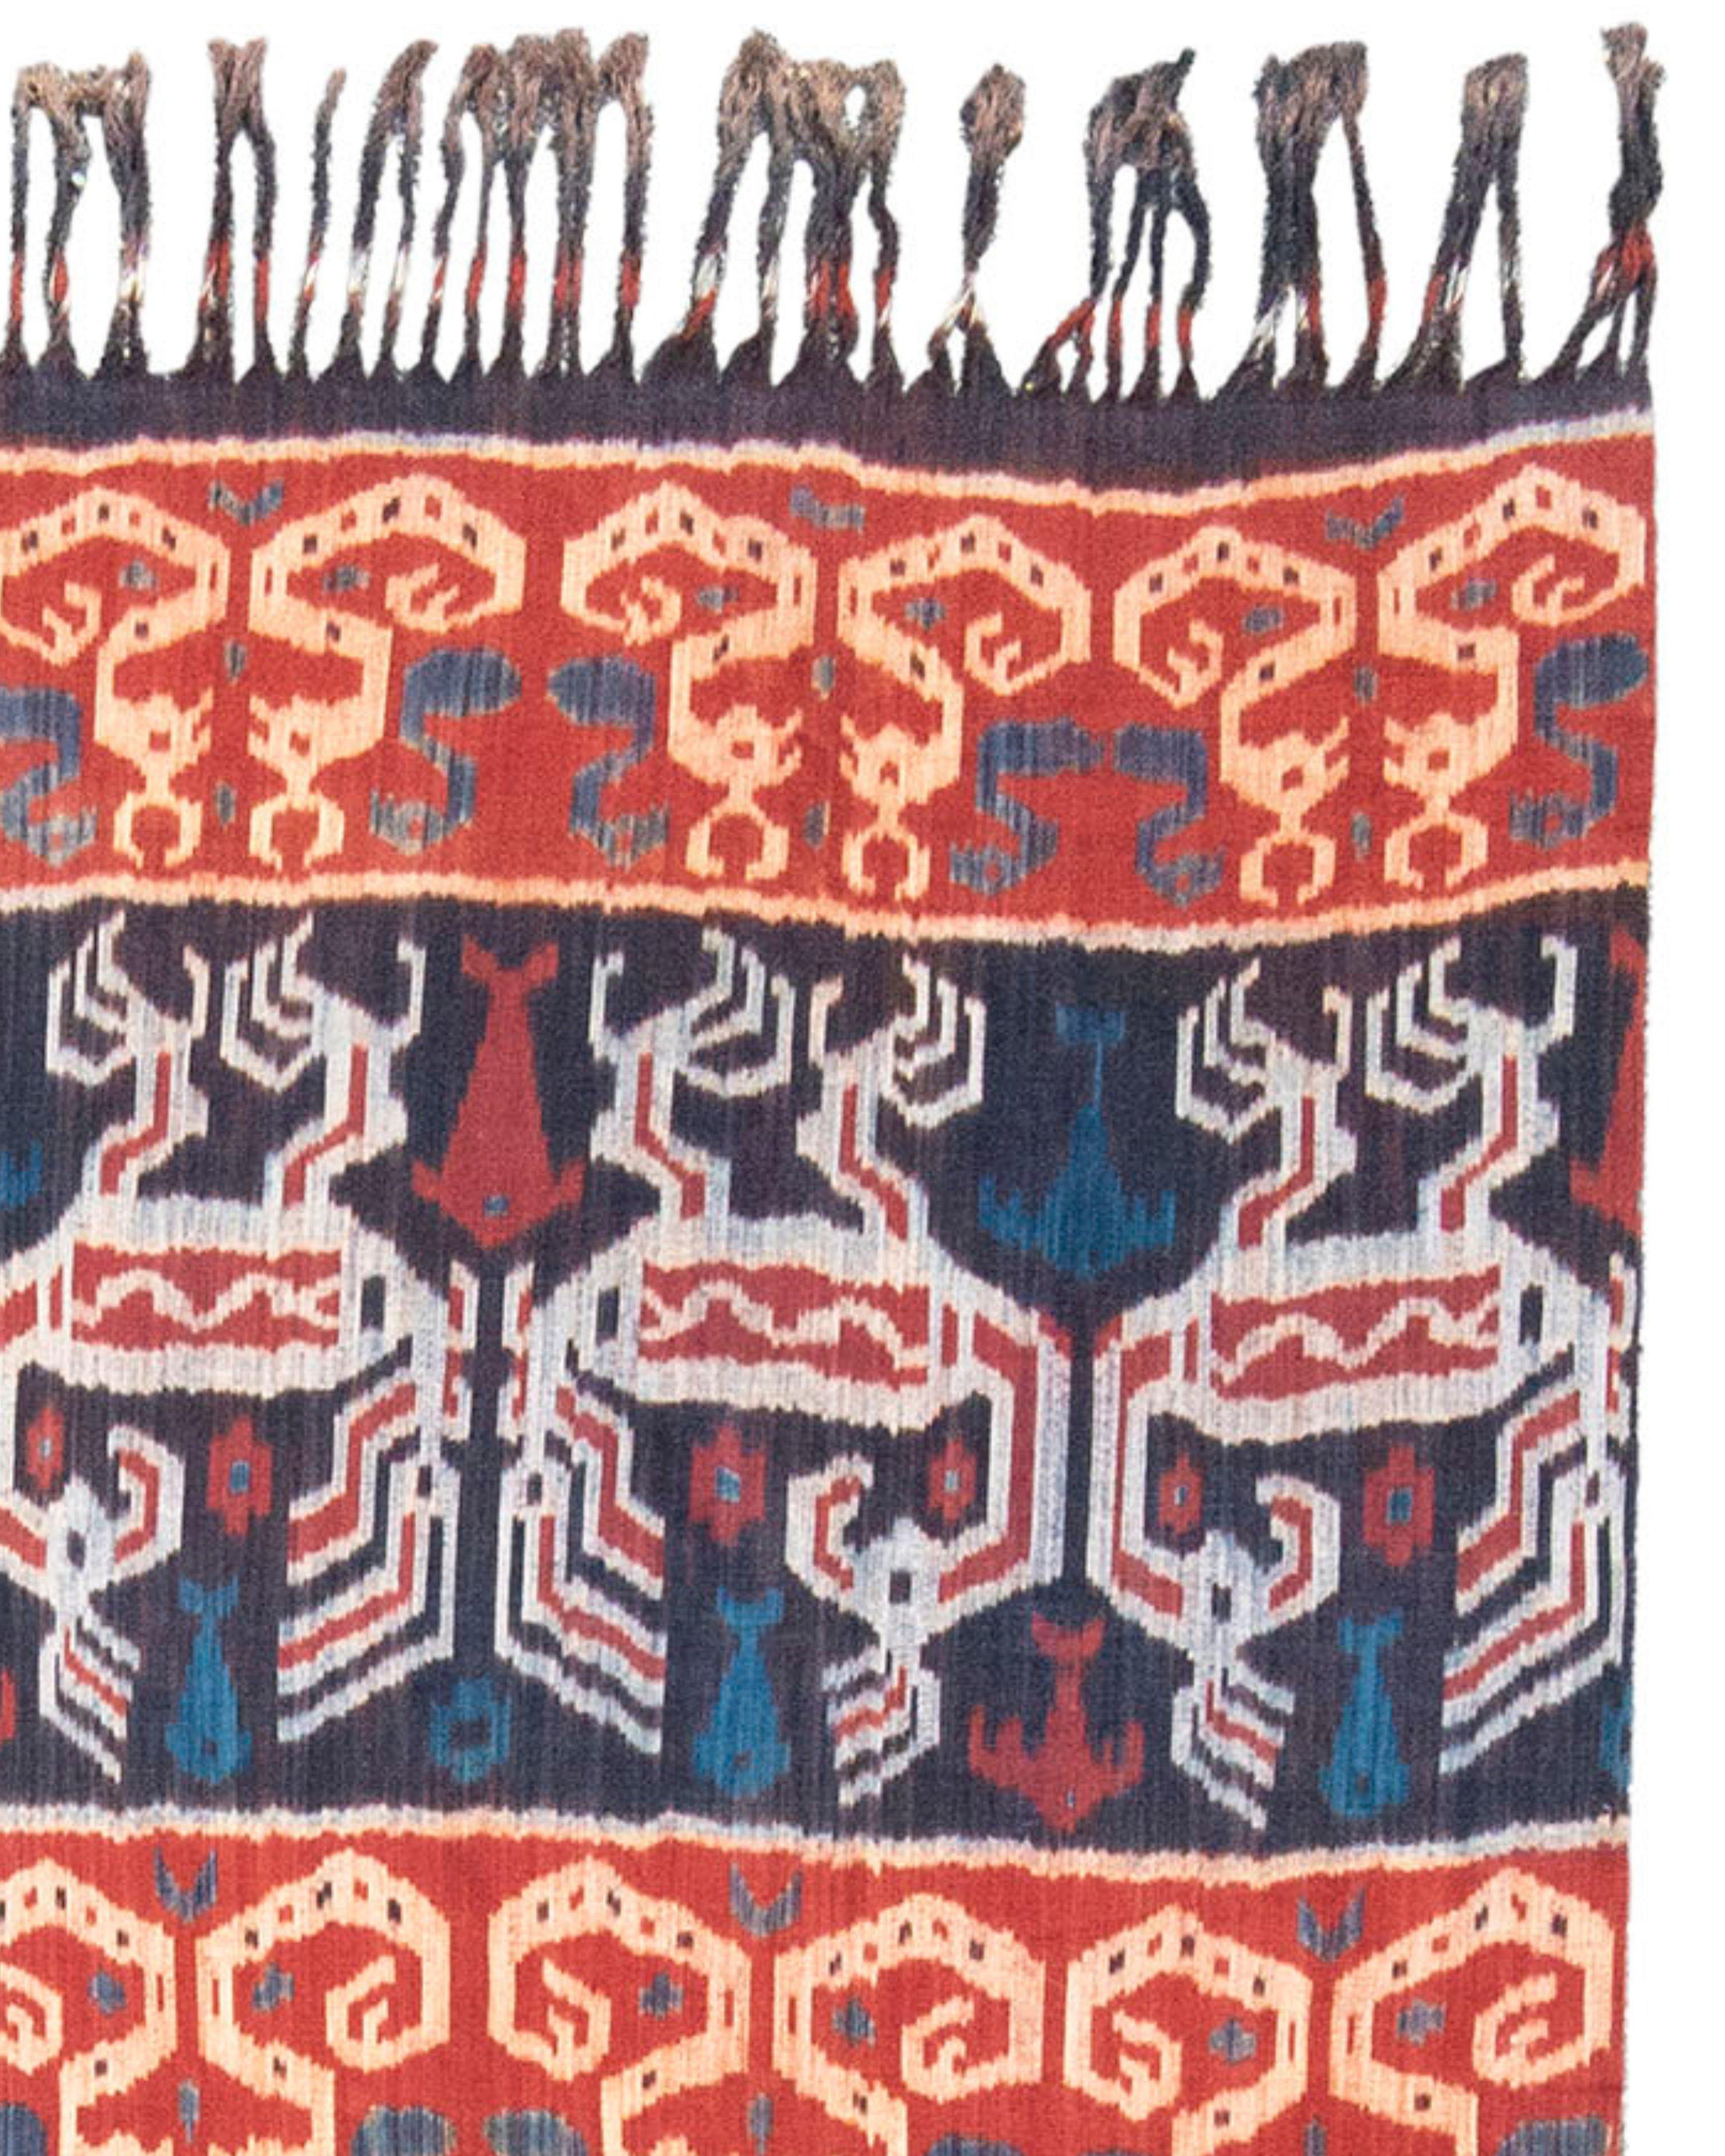 Ikat textile Rug, 20th Century

Additional Information:
Dimensions: 5'0